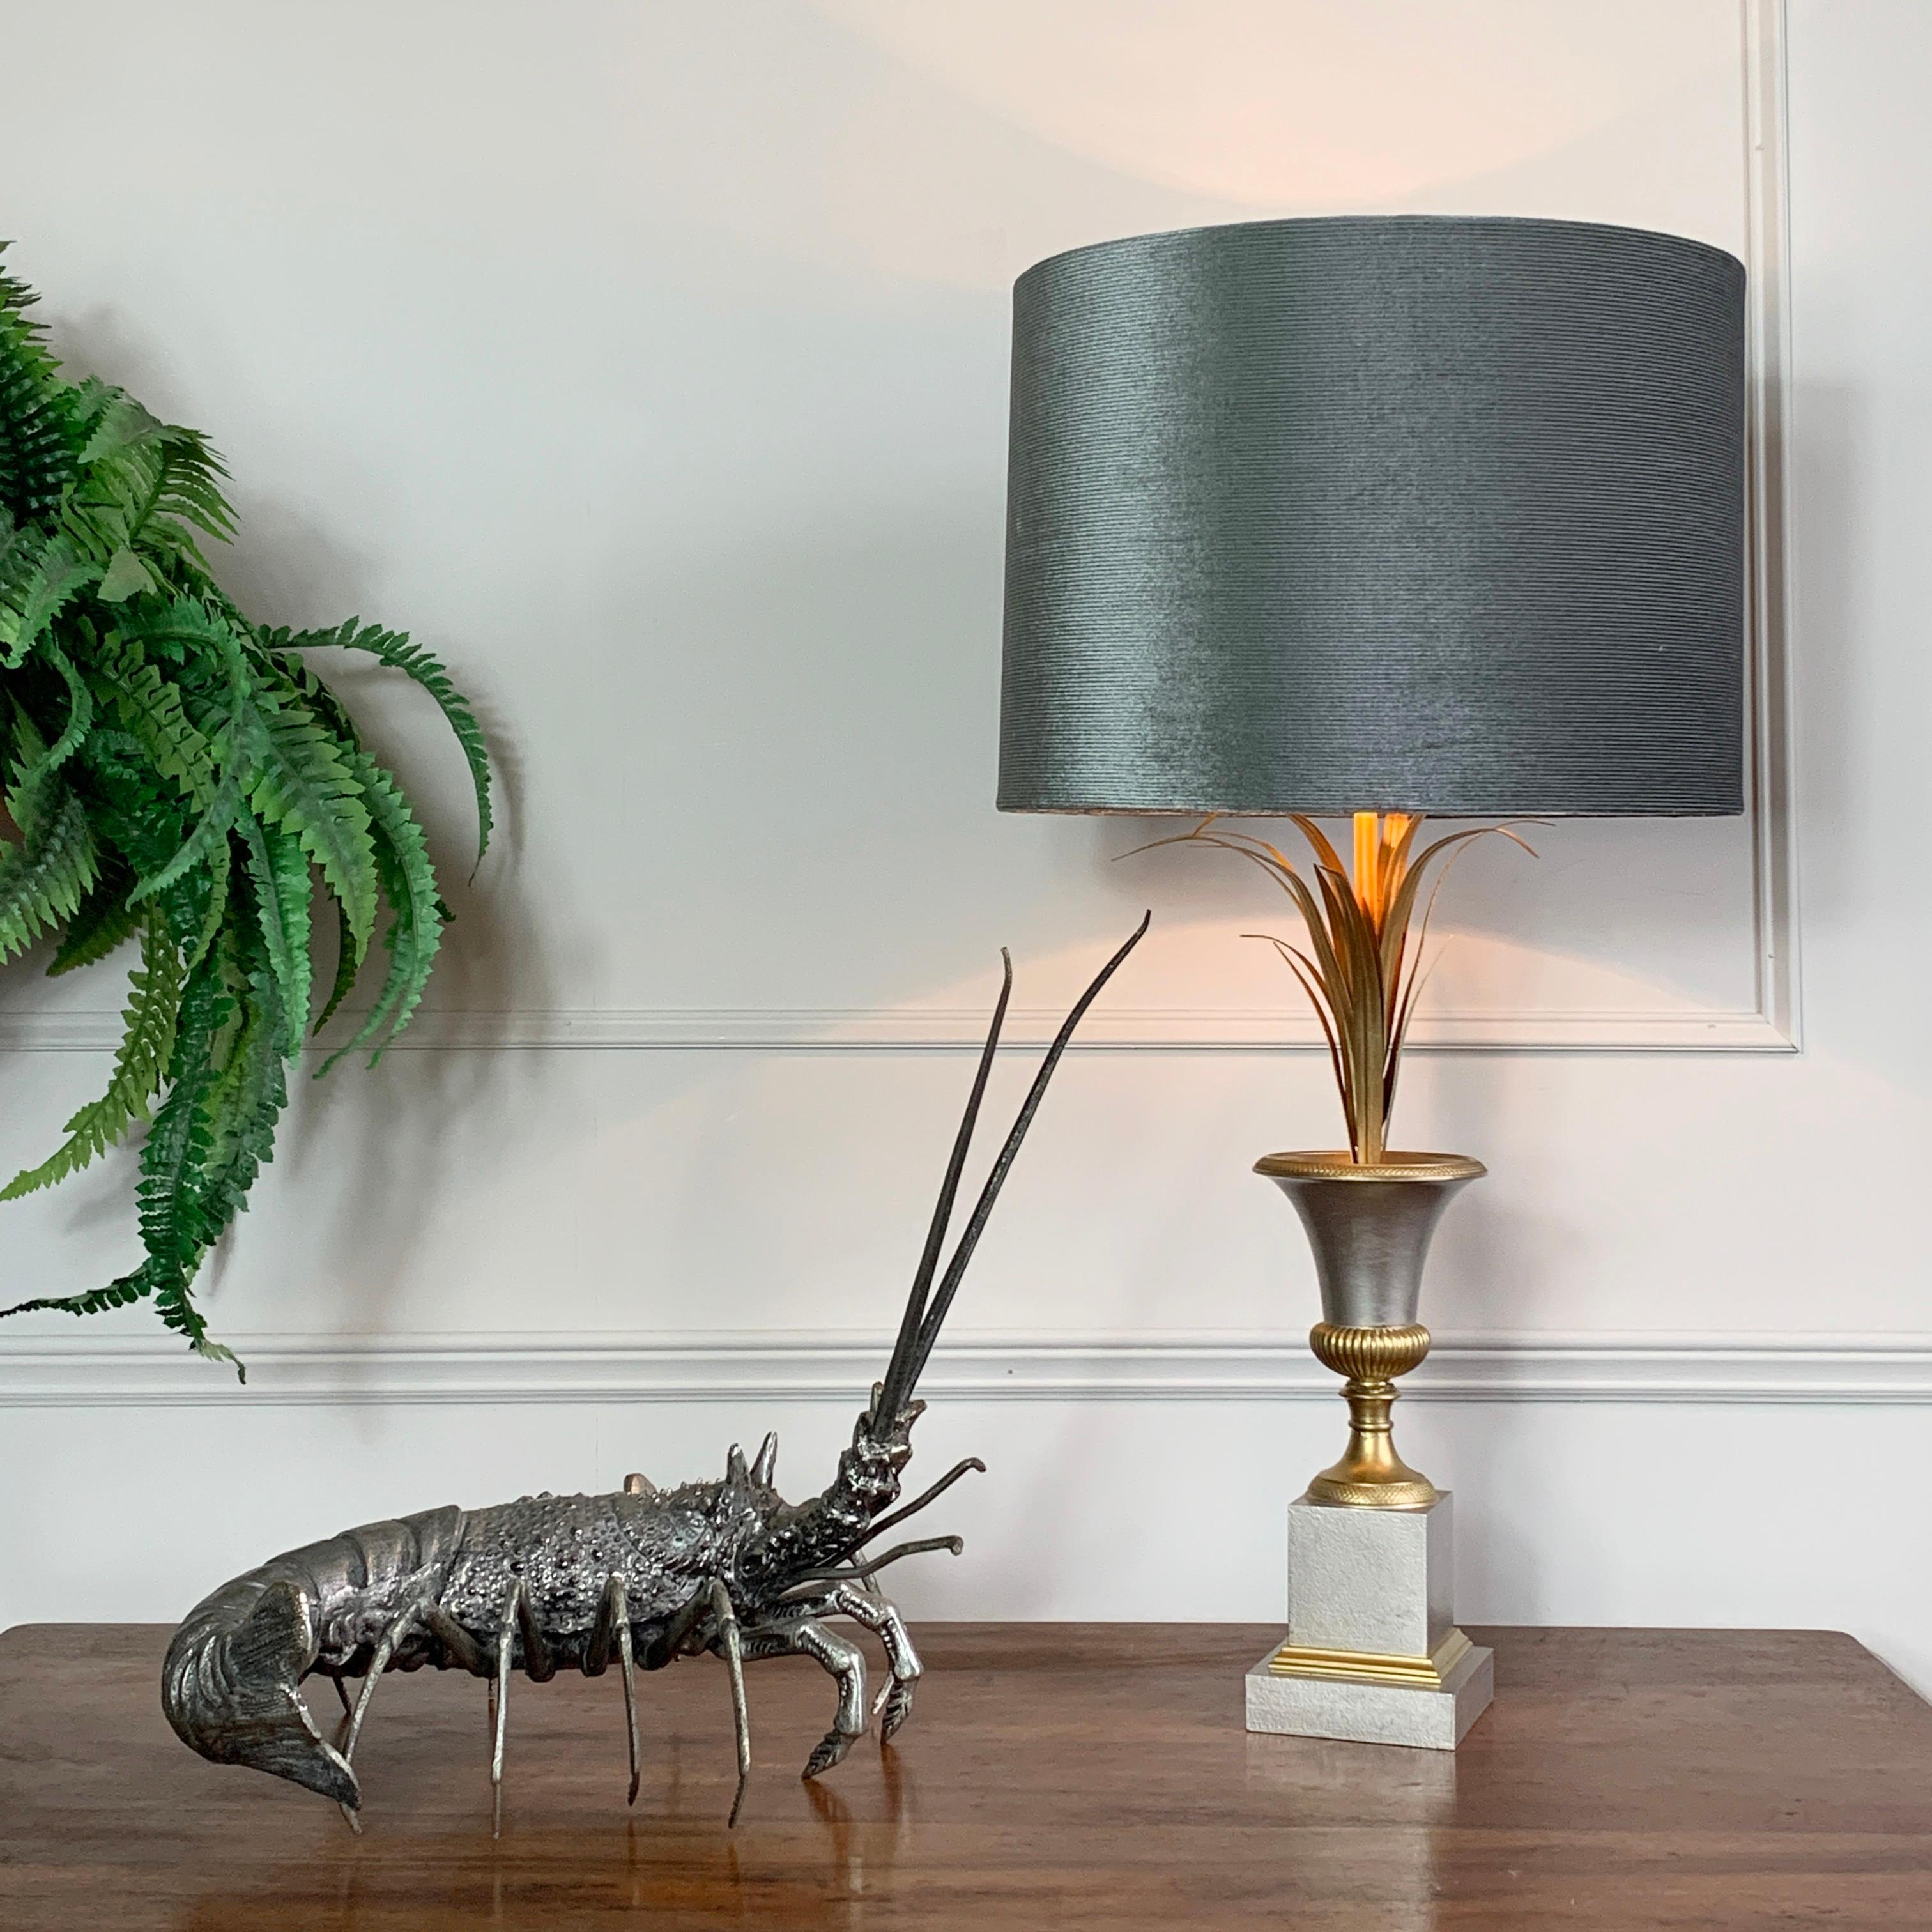 An exceptional vase Roseaux table Lamp from the world renowned Maison Charles. This piece is in a beautiful silver and gilt palette, fully stamped to the base Made in France / Charles et Fils.
The lampshade is a modern replacement, not original to